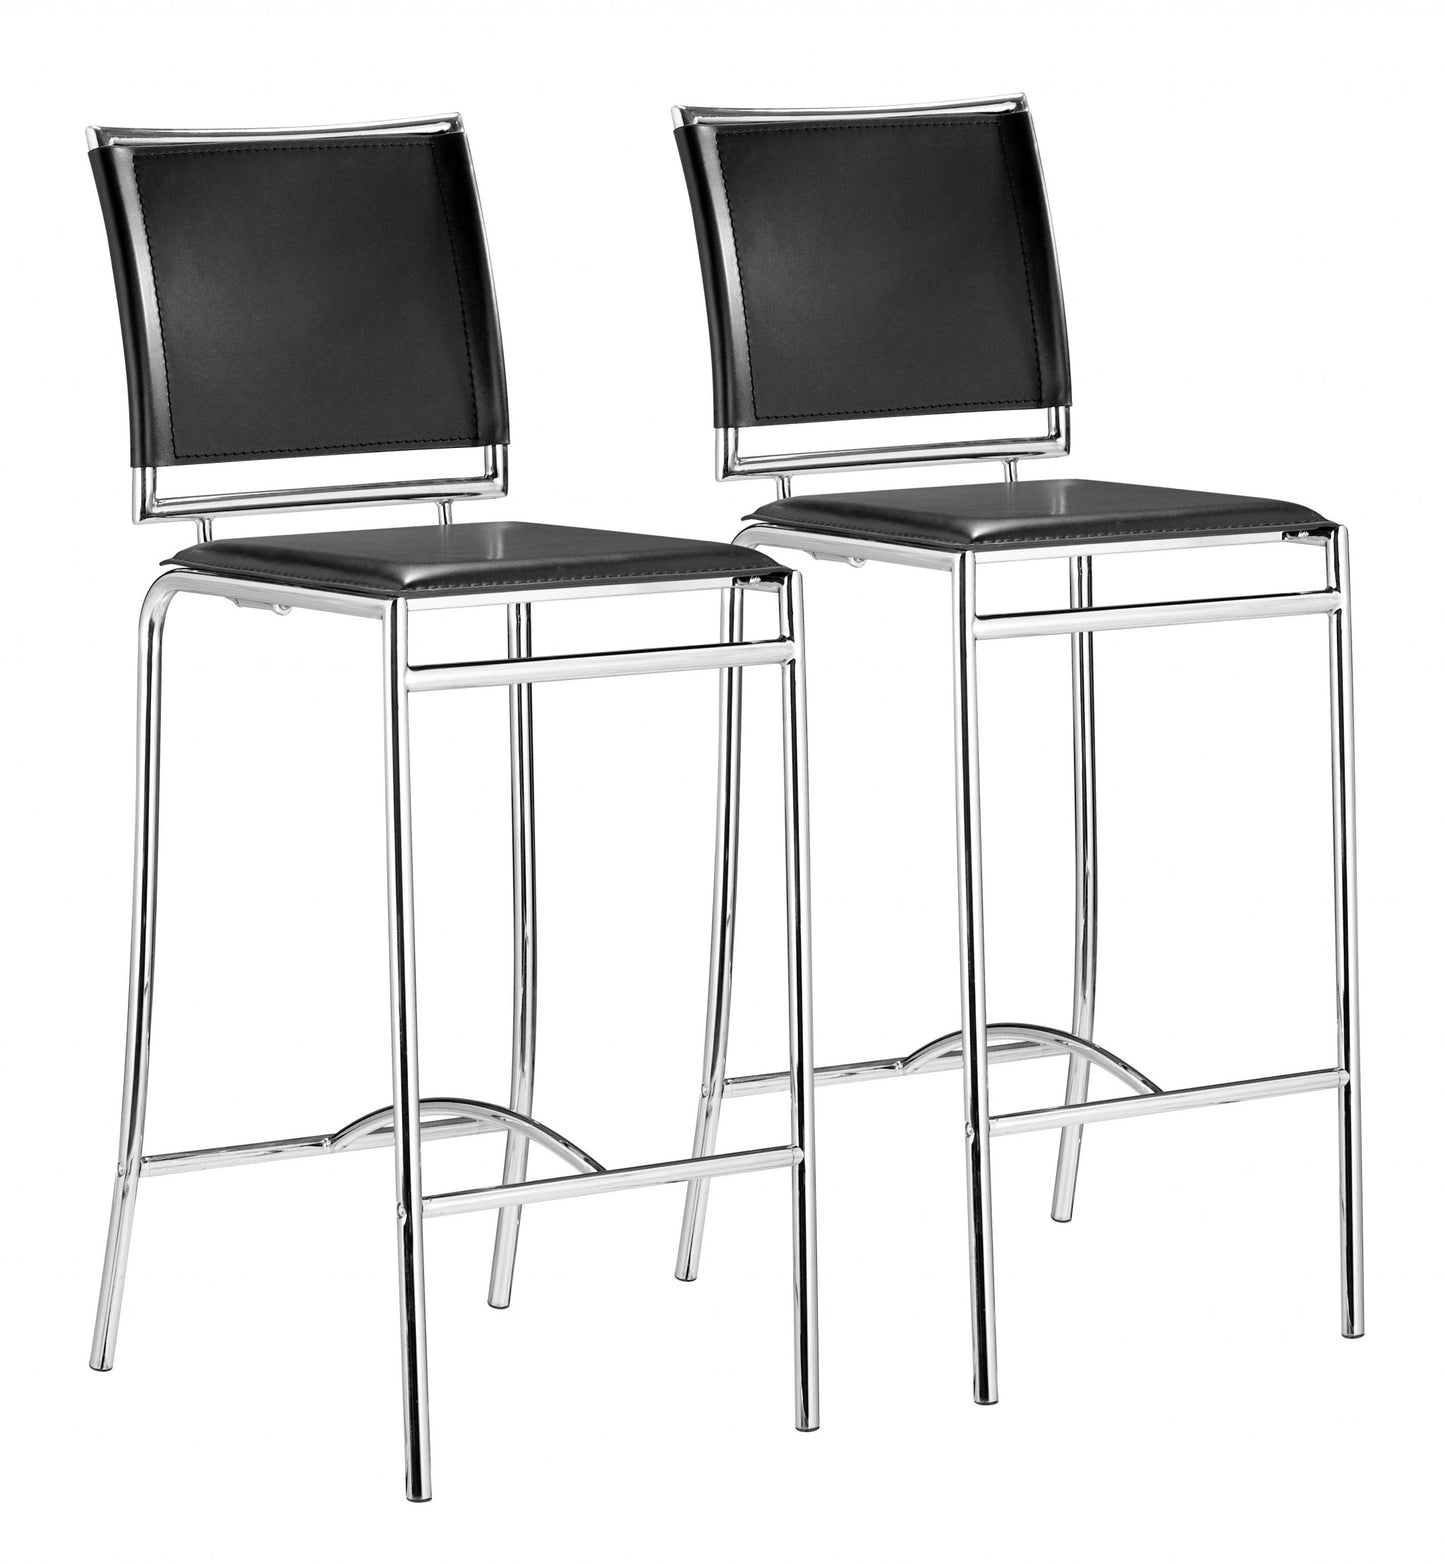 Set Of Two 38" Black Steel Low Back Chairs With Footrest By Homeroots